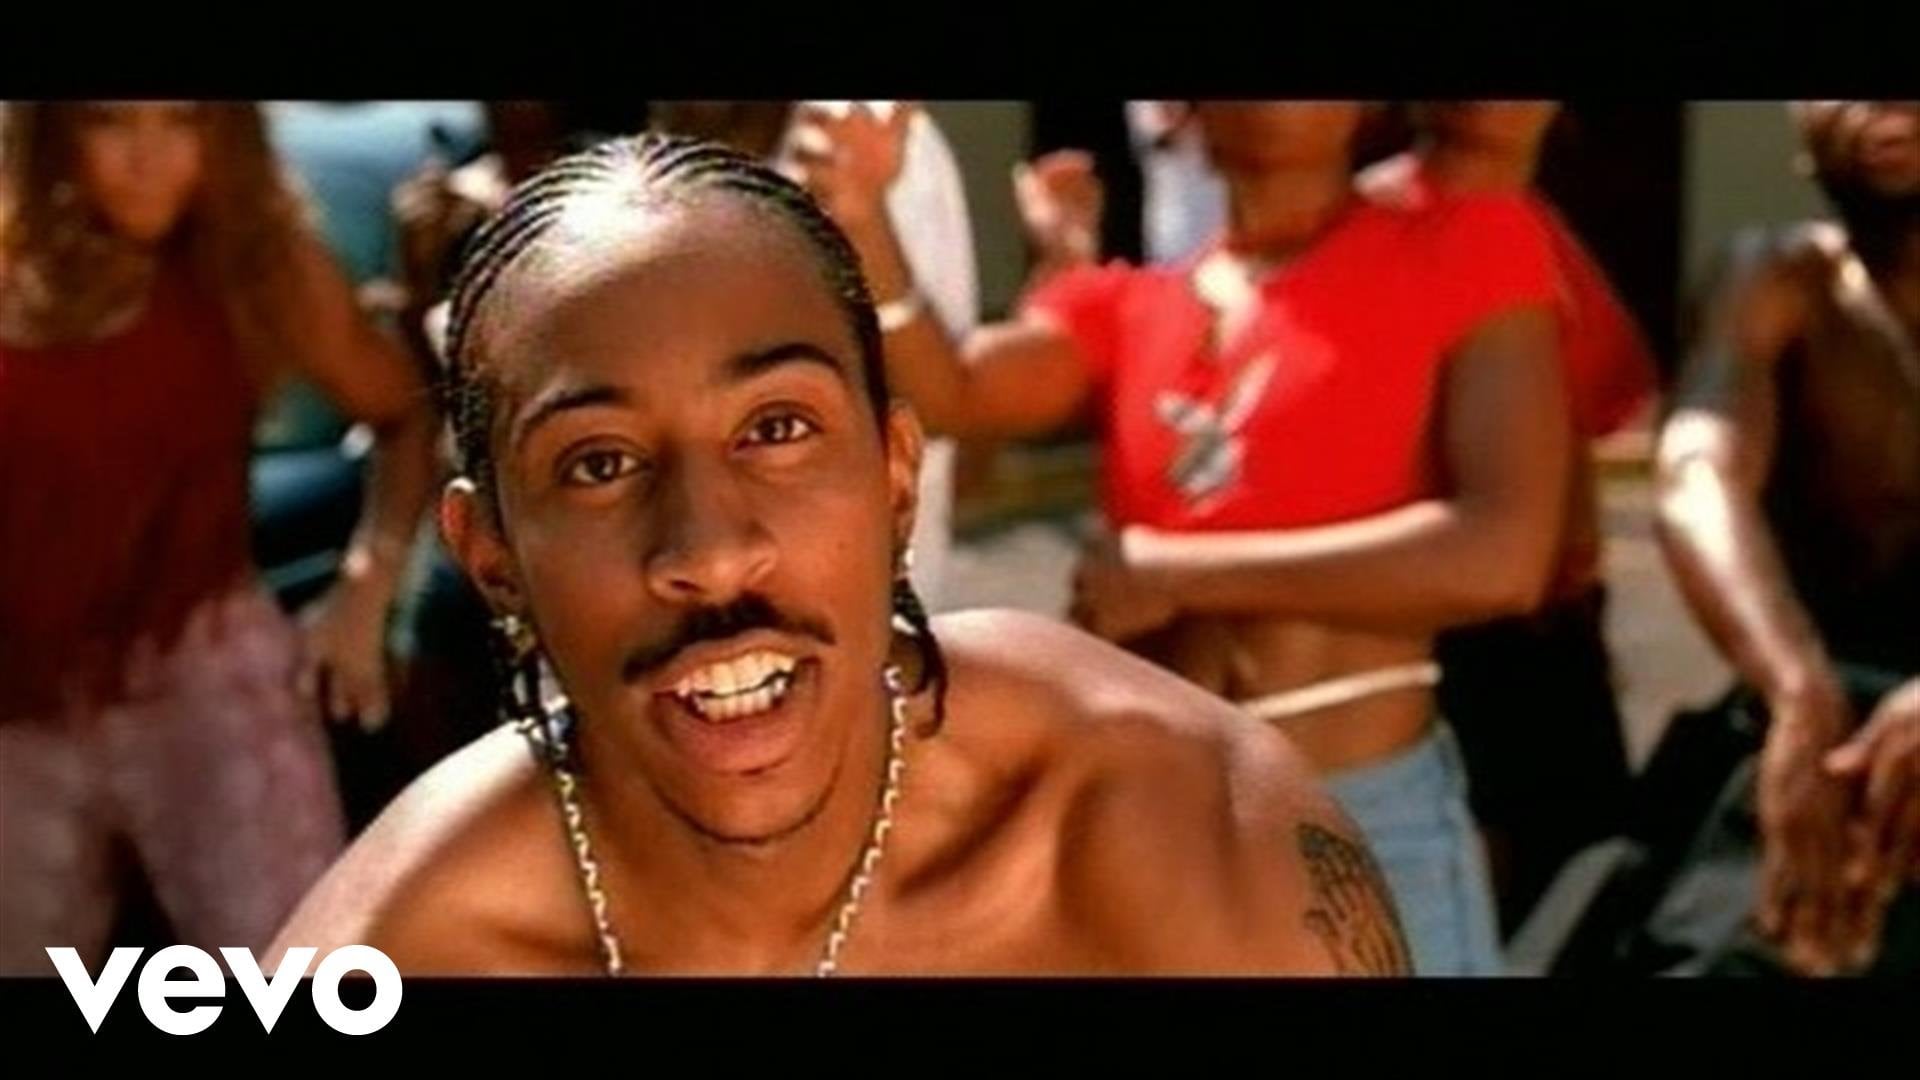 What S Your Fantasy By Ludacris Feat Shawnna These Sexy Video